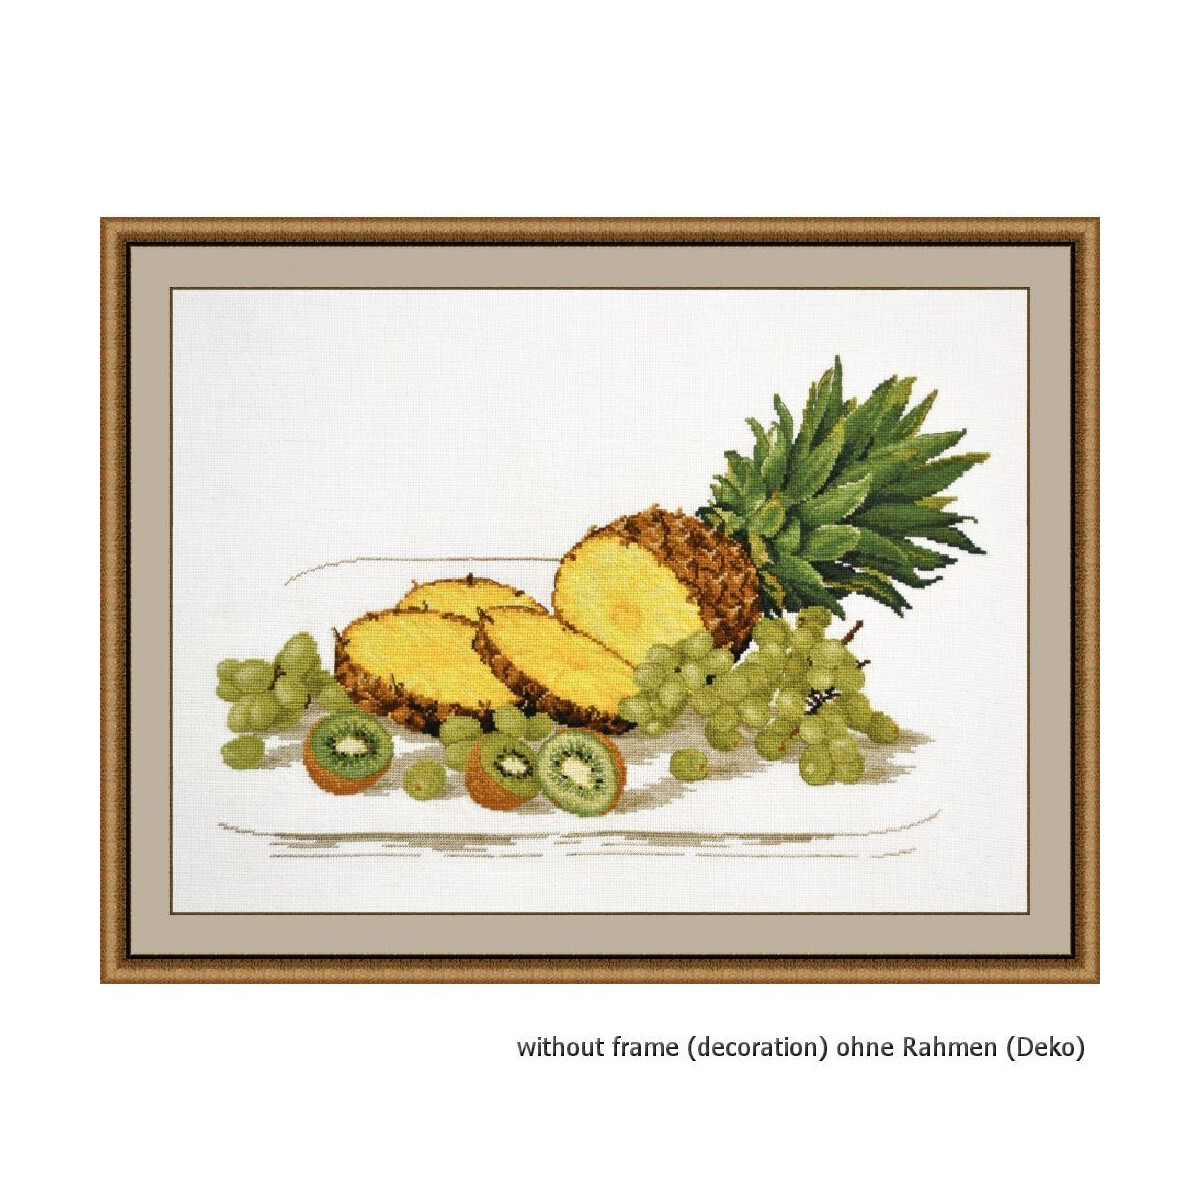 Oven counted cross stitch kit "Taste of the...